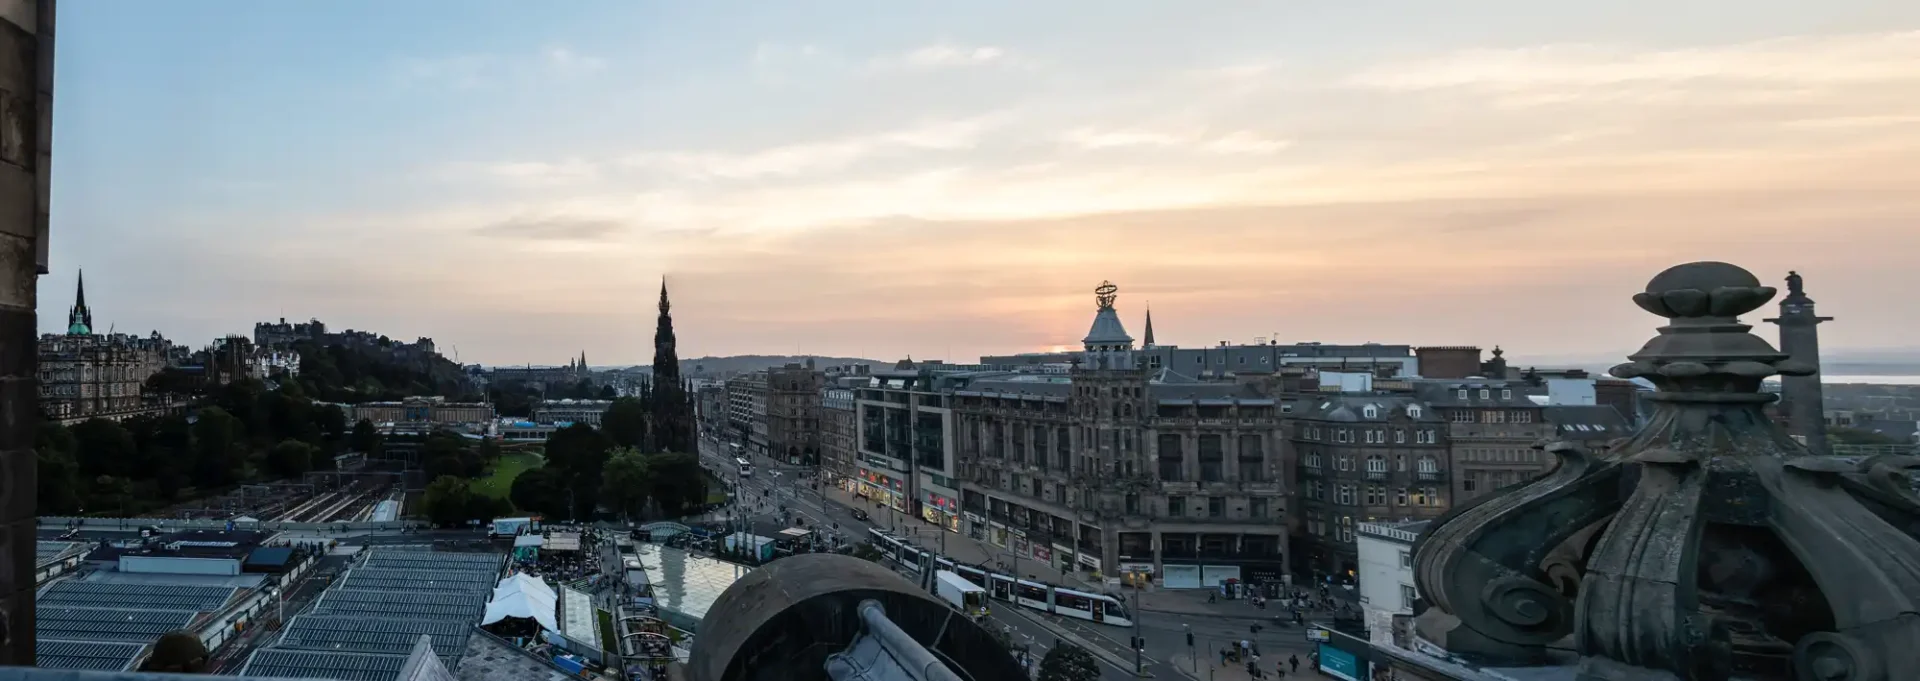 Panoramic view of edinburgh at sunset featuring historic buildings and busy city streets, with edinburgh castle on the left and scott monument visible.